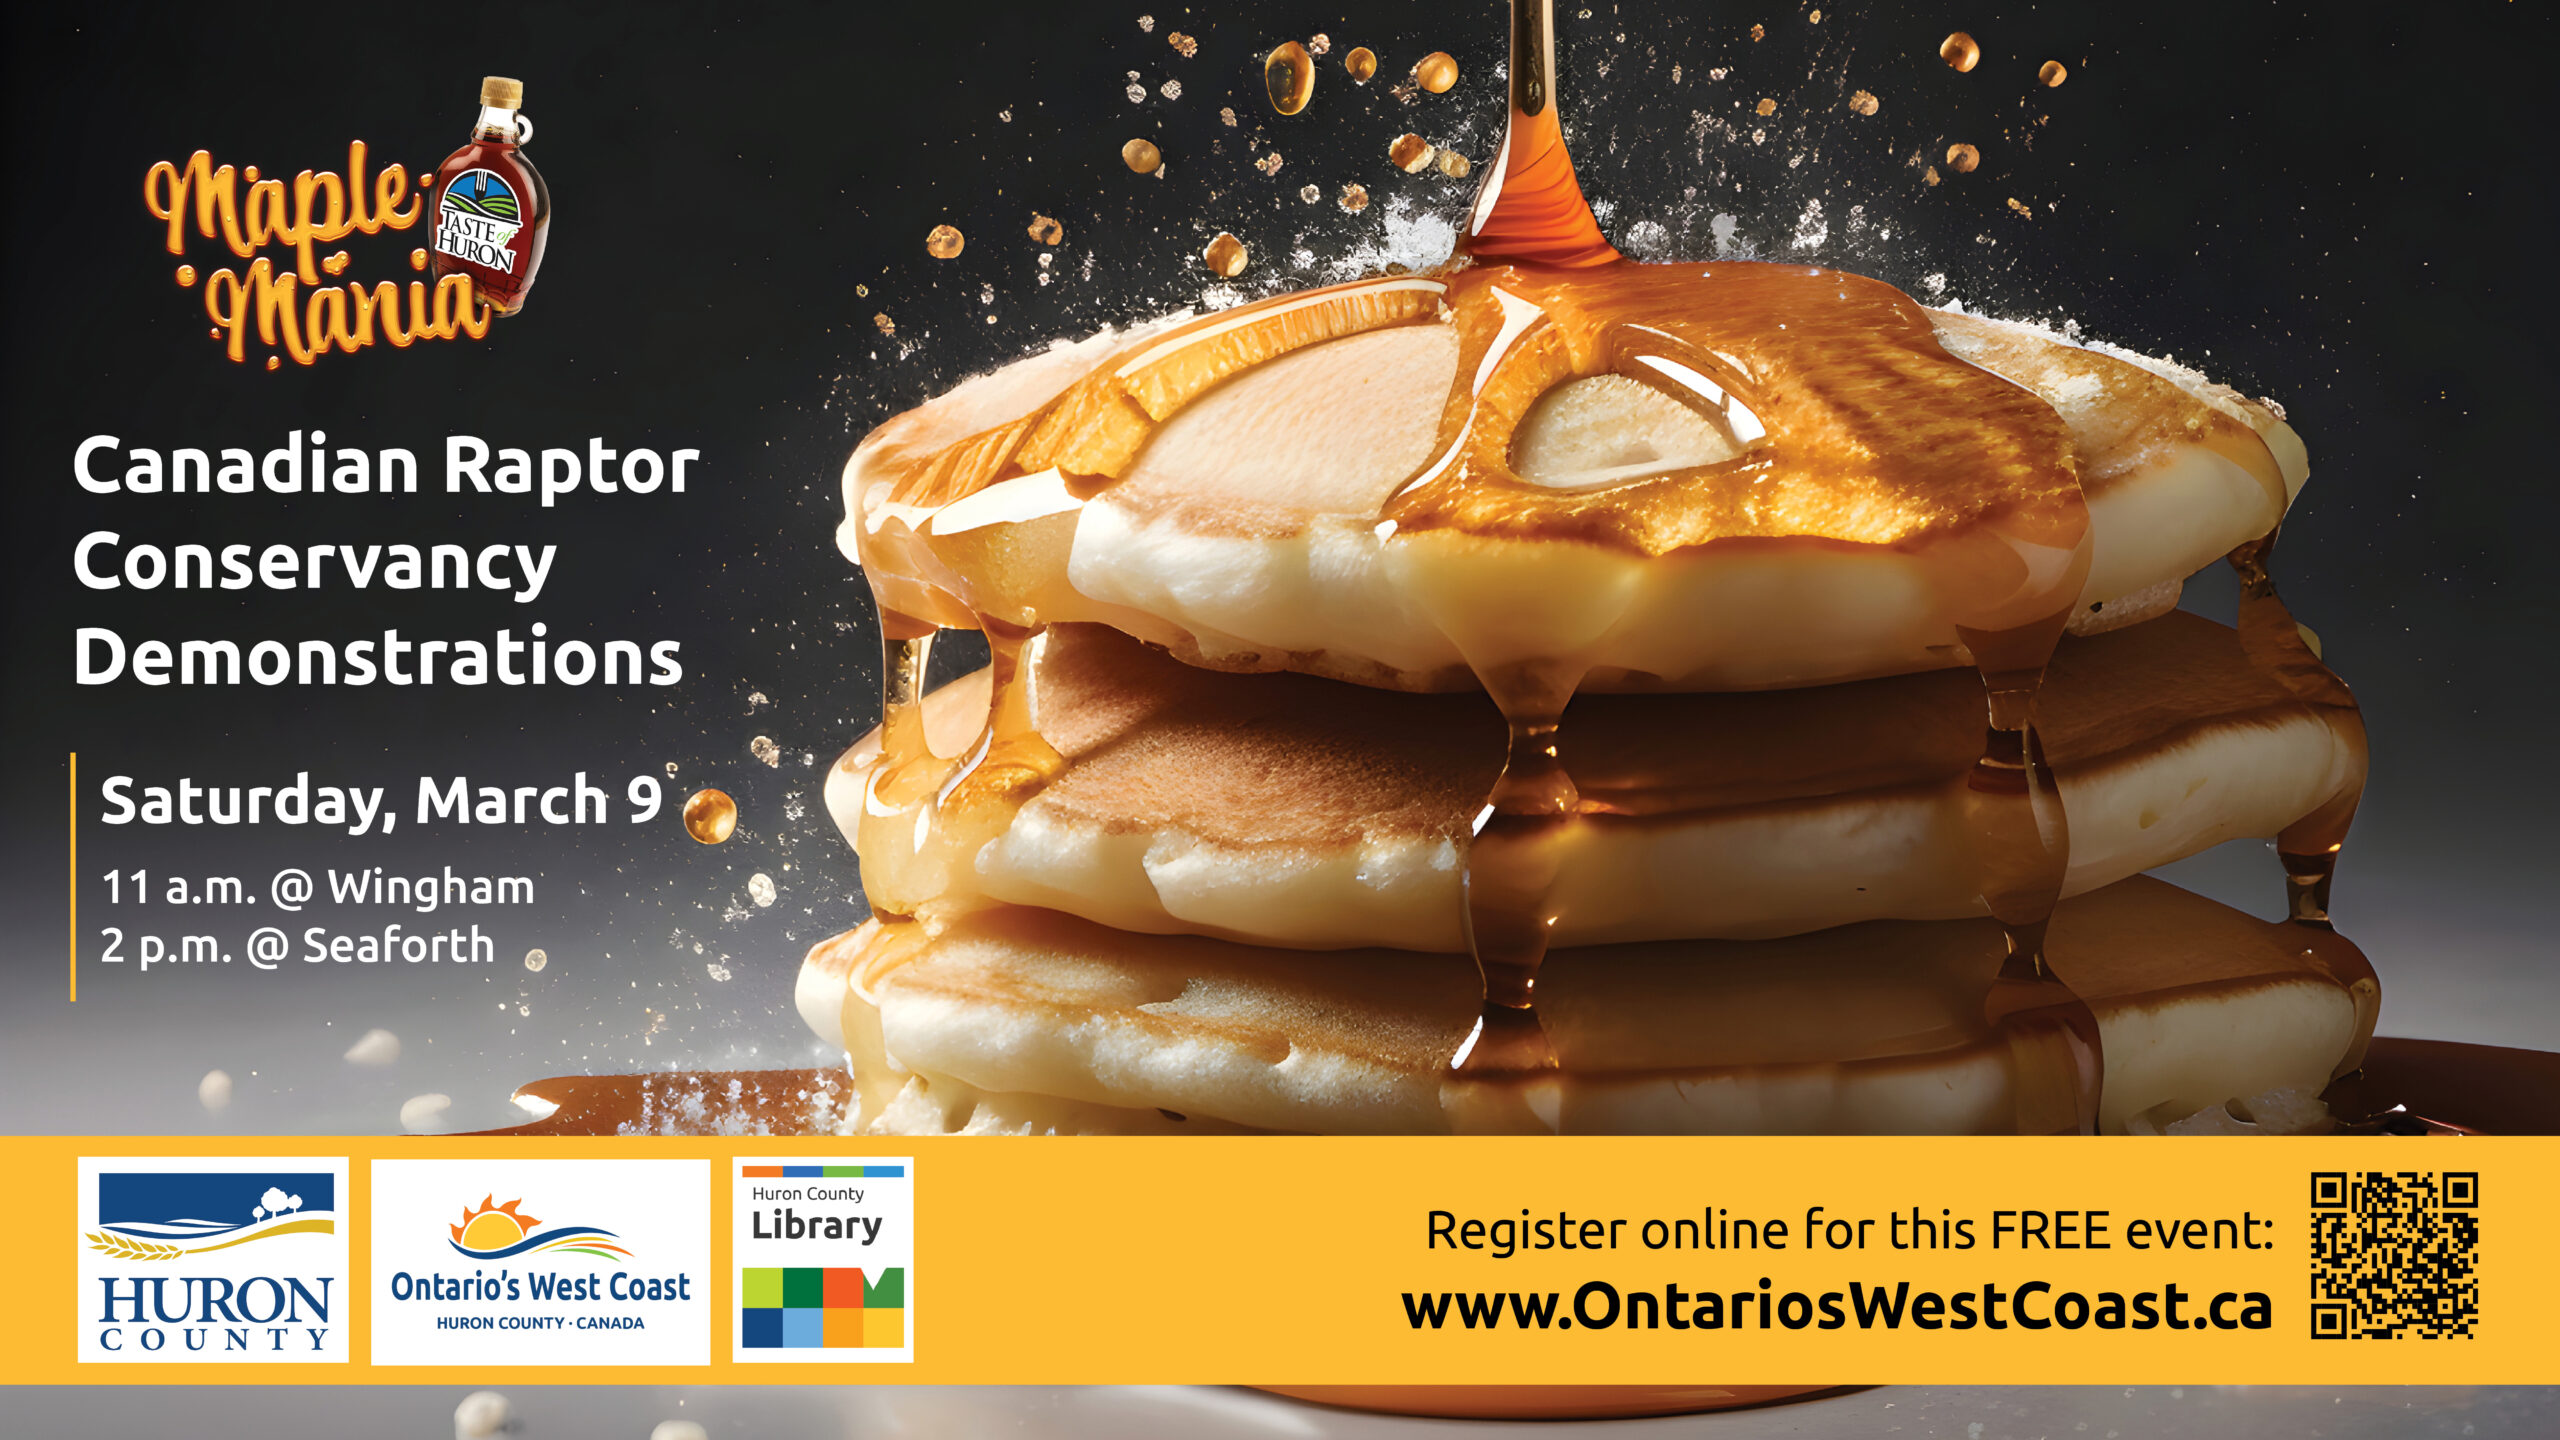 Photo of a stack of pancakes with maple syrup. Text promotes Maple Mania with birds of prey demonstration at Wingham and Seaforth Branches